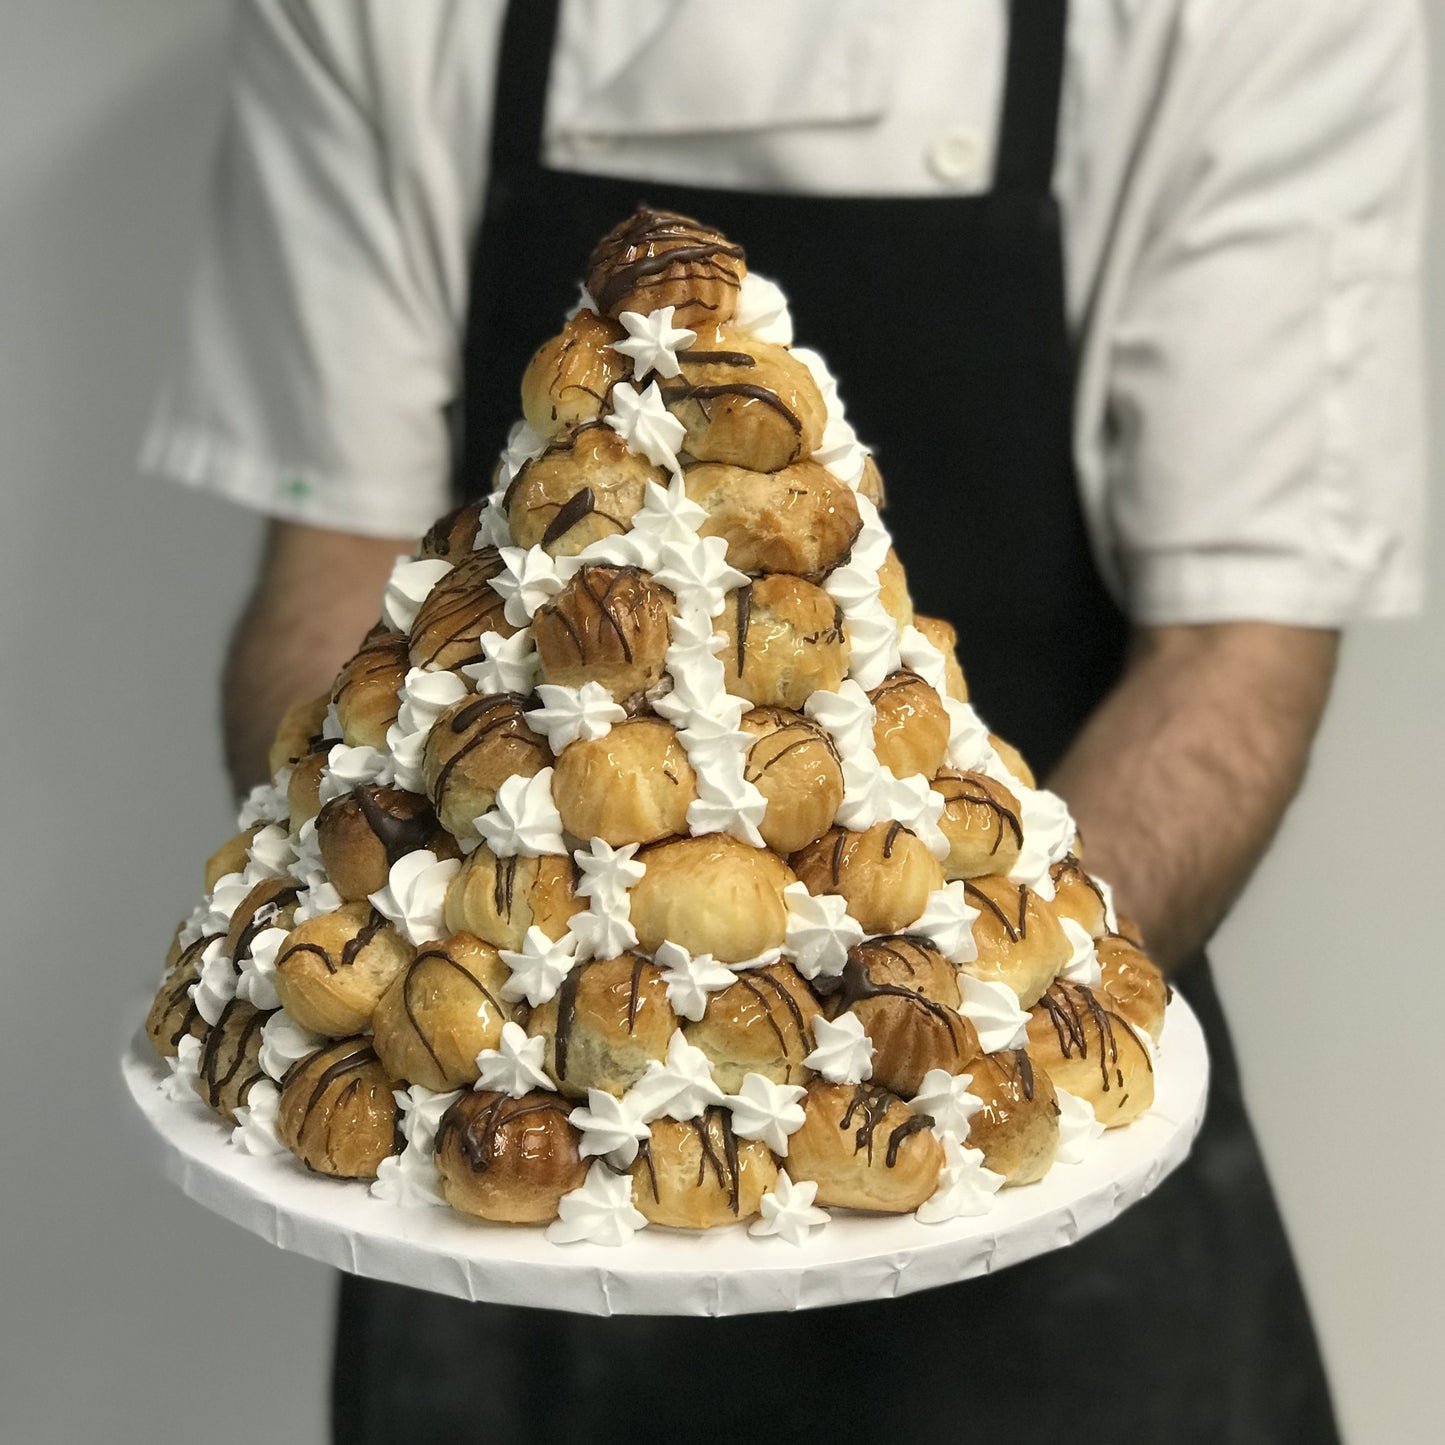 Tower of St. Honore pastries